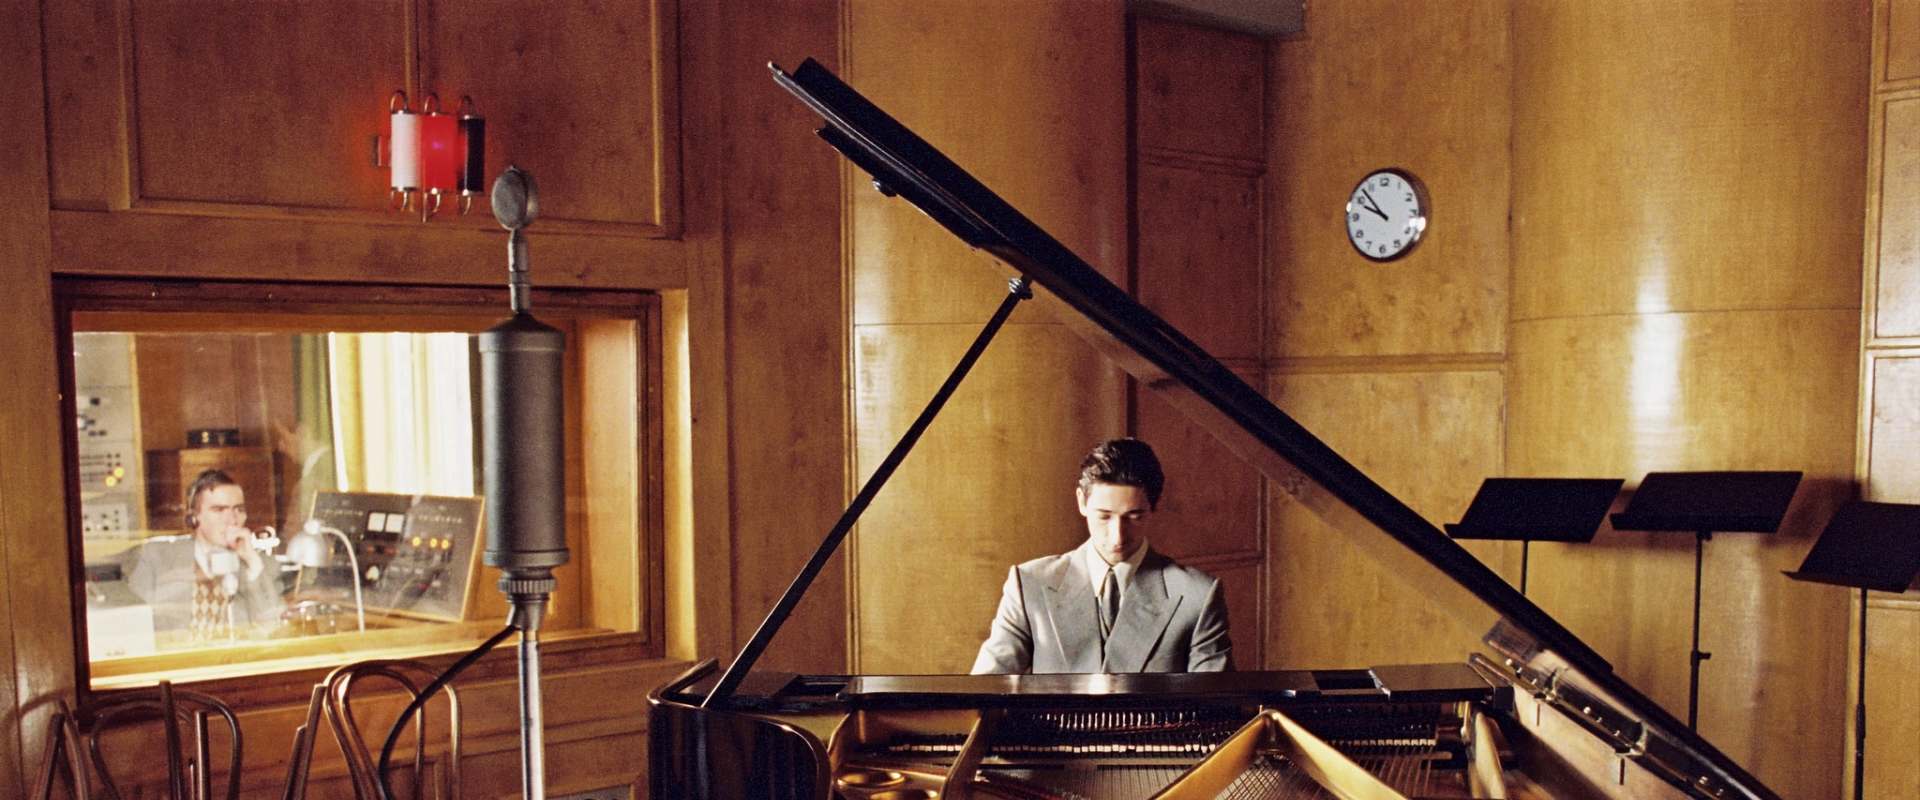 The Pianist background 2